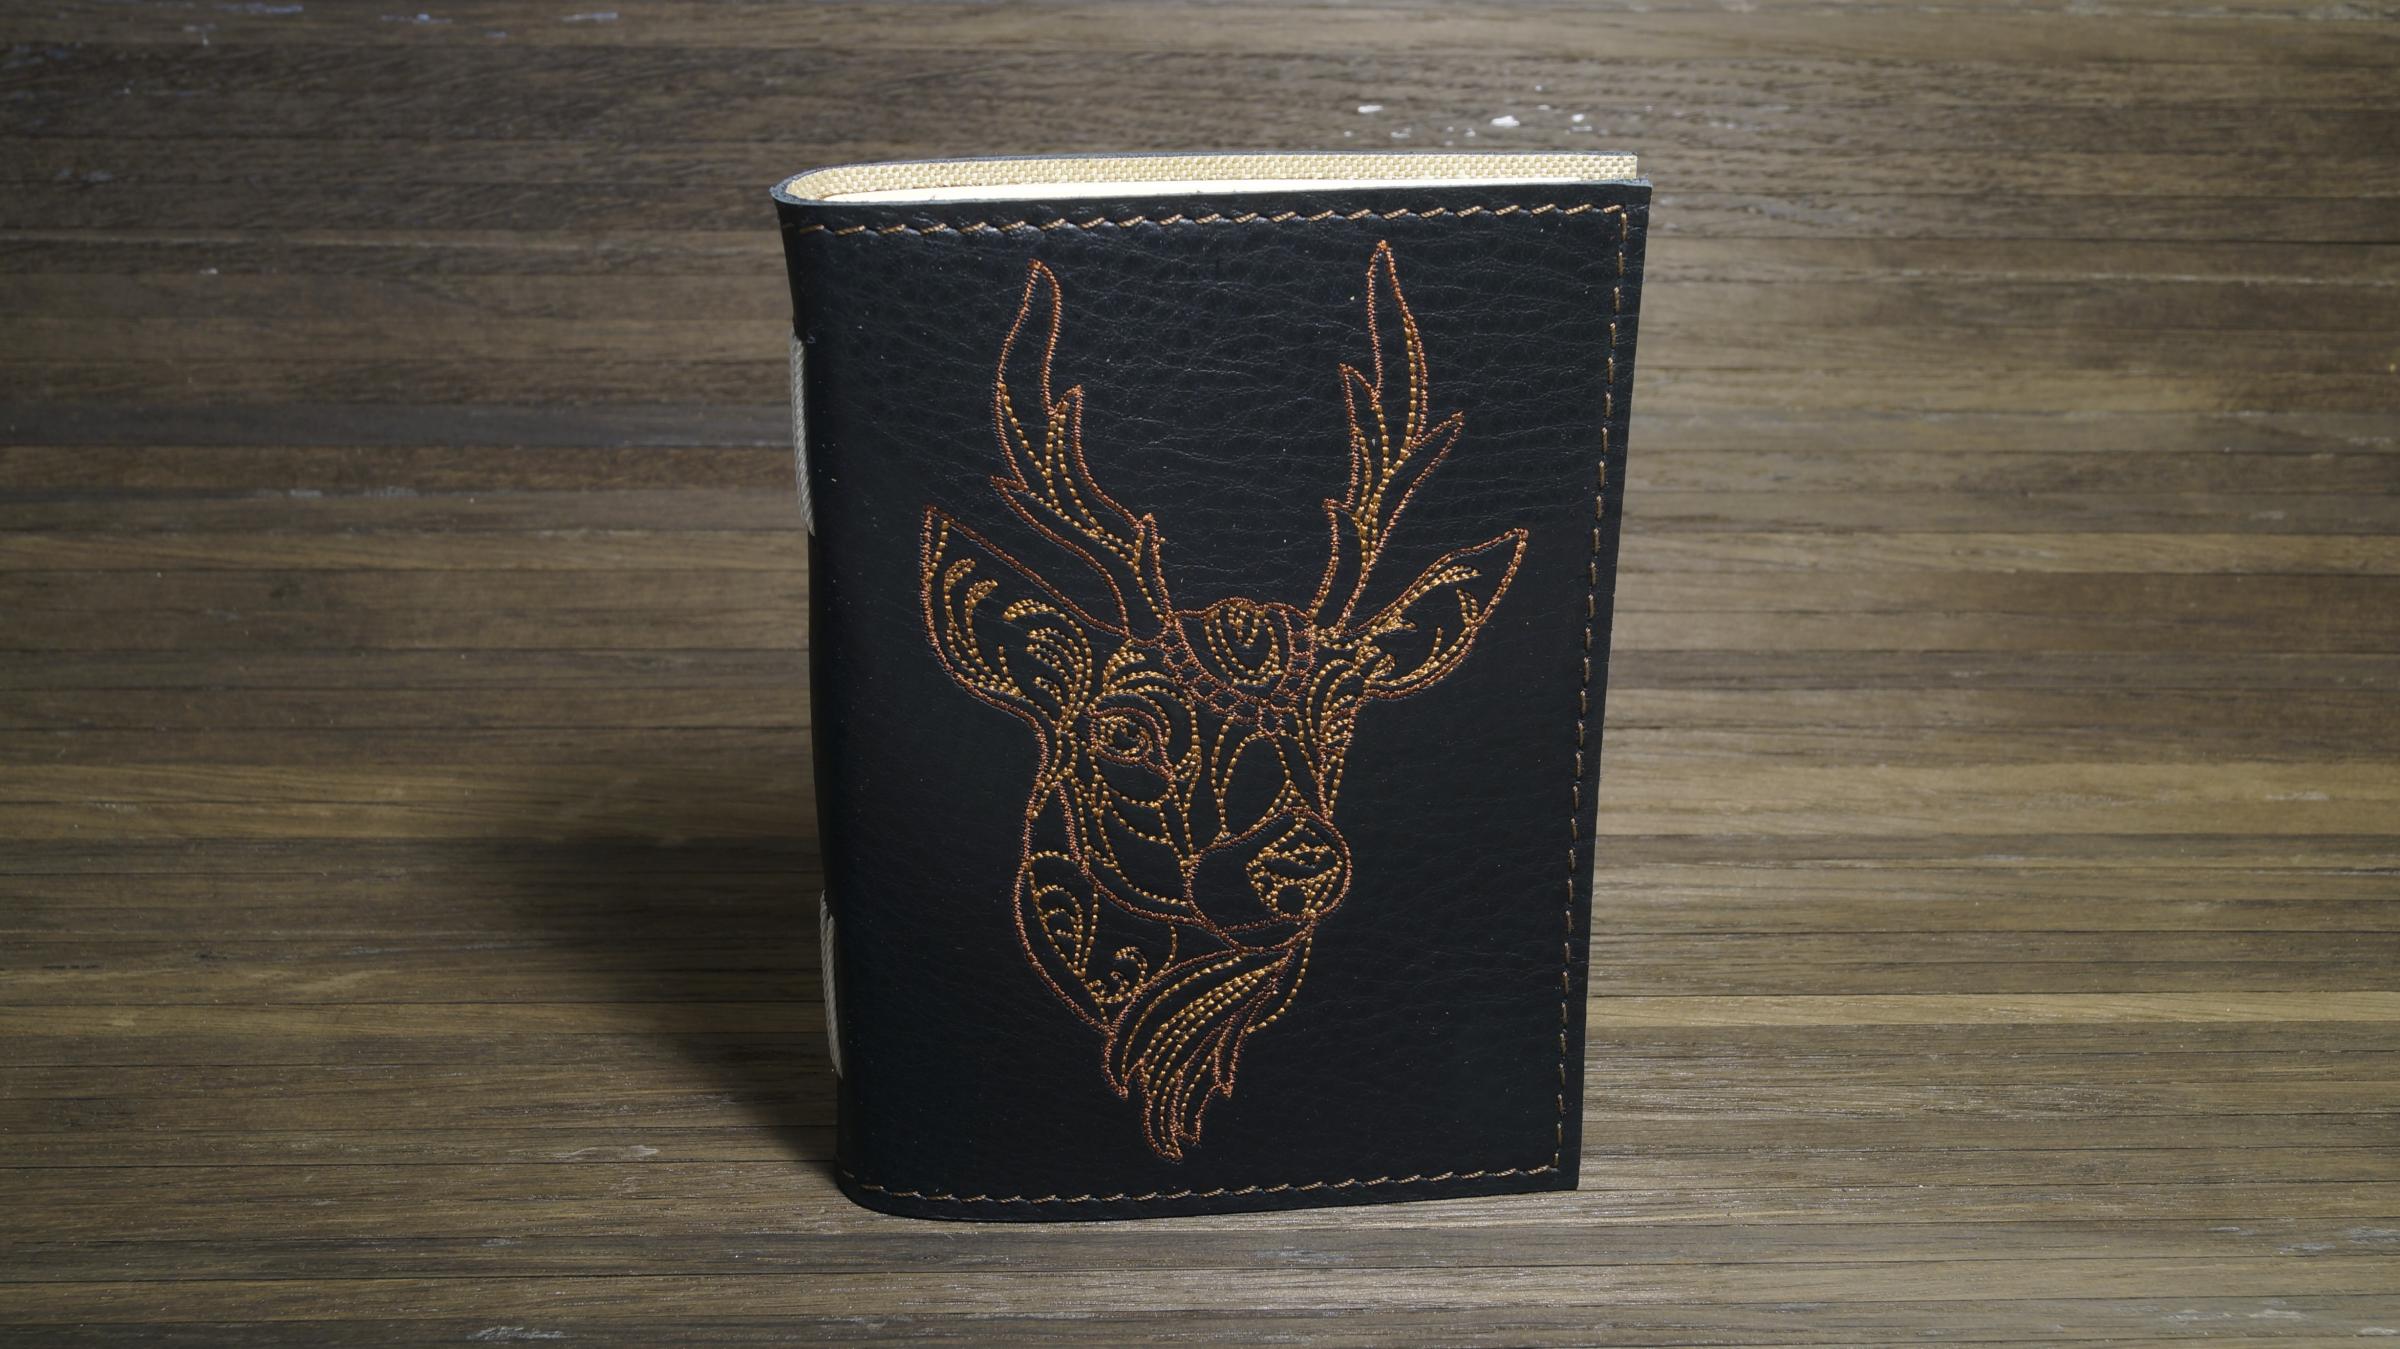 Embroidered cover with Deer embroidery design